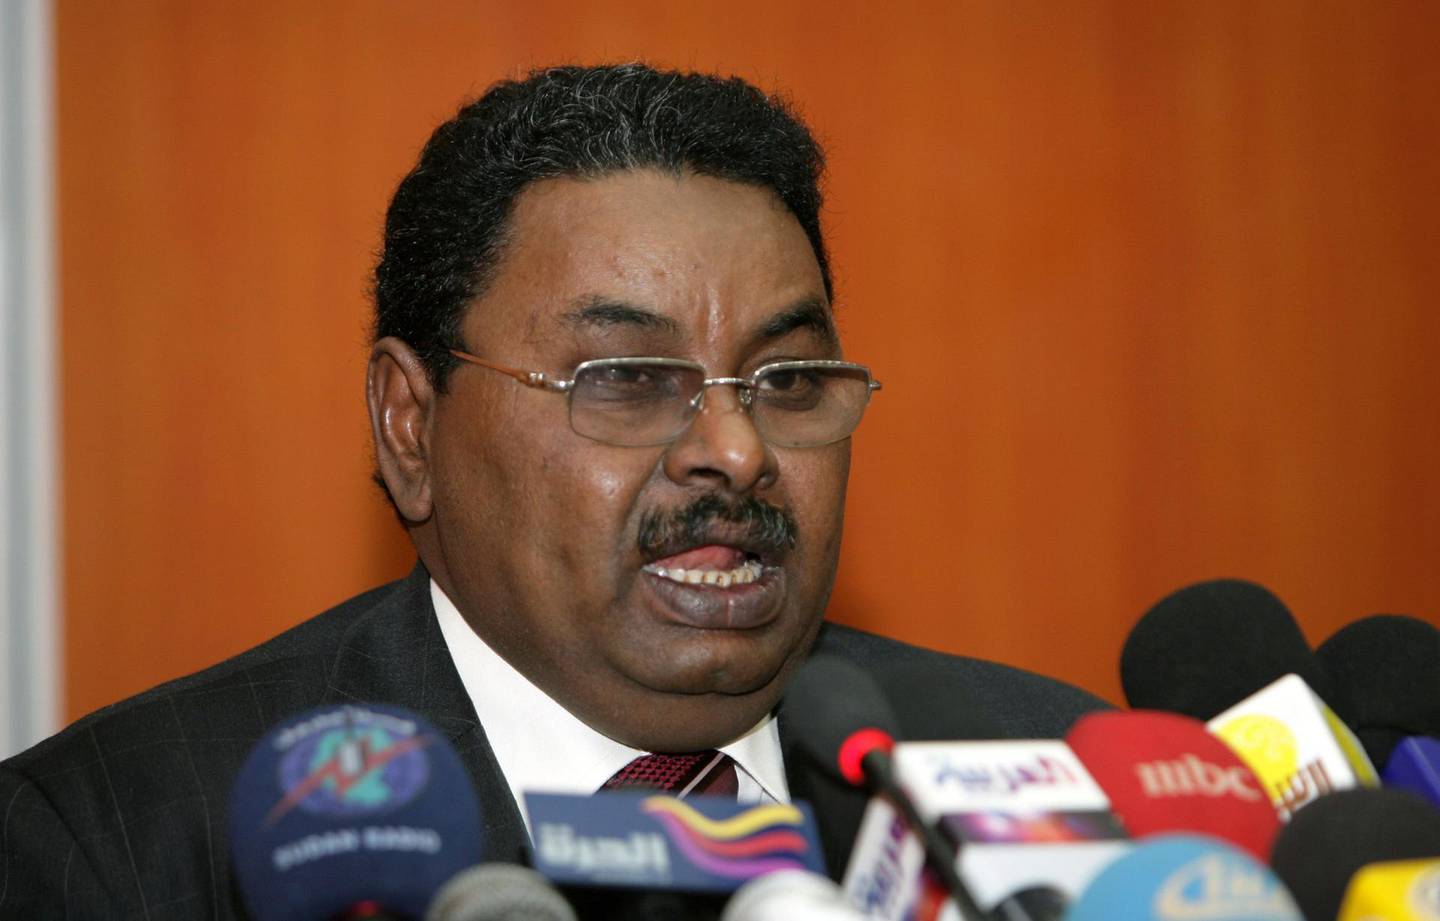 (FILES) This file picture taken on October 14, 2010 shows then-advisor to former Sudanese president Salah Abdallah Mohammed Salih, widely known as Salih Ghosh, giving a press conference in Addis Ababa


 The head of Sudan's feared National Intelligence and Security Service, Salih Ghosh, has resigned from his post, the country's new military rulers said on April 13, 2019. / AFP / ASHRAF SHAZLY
